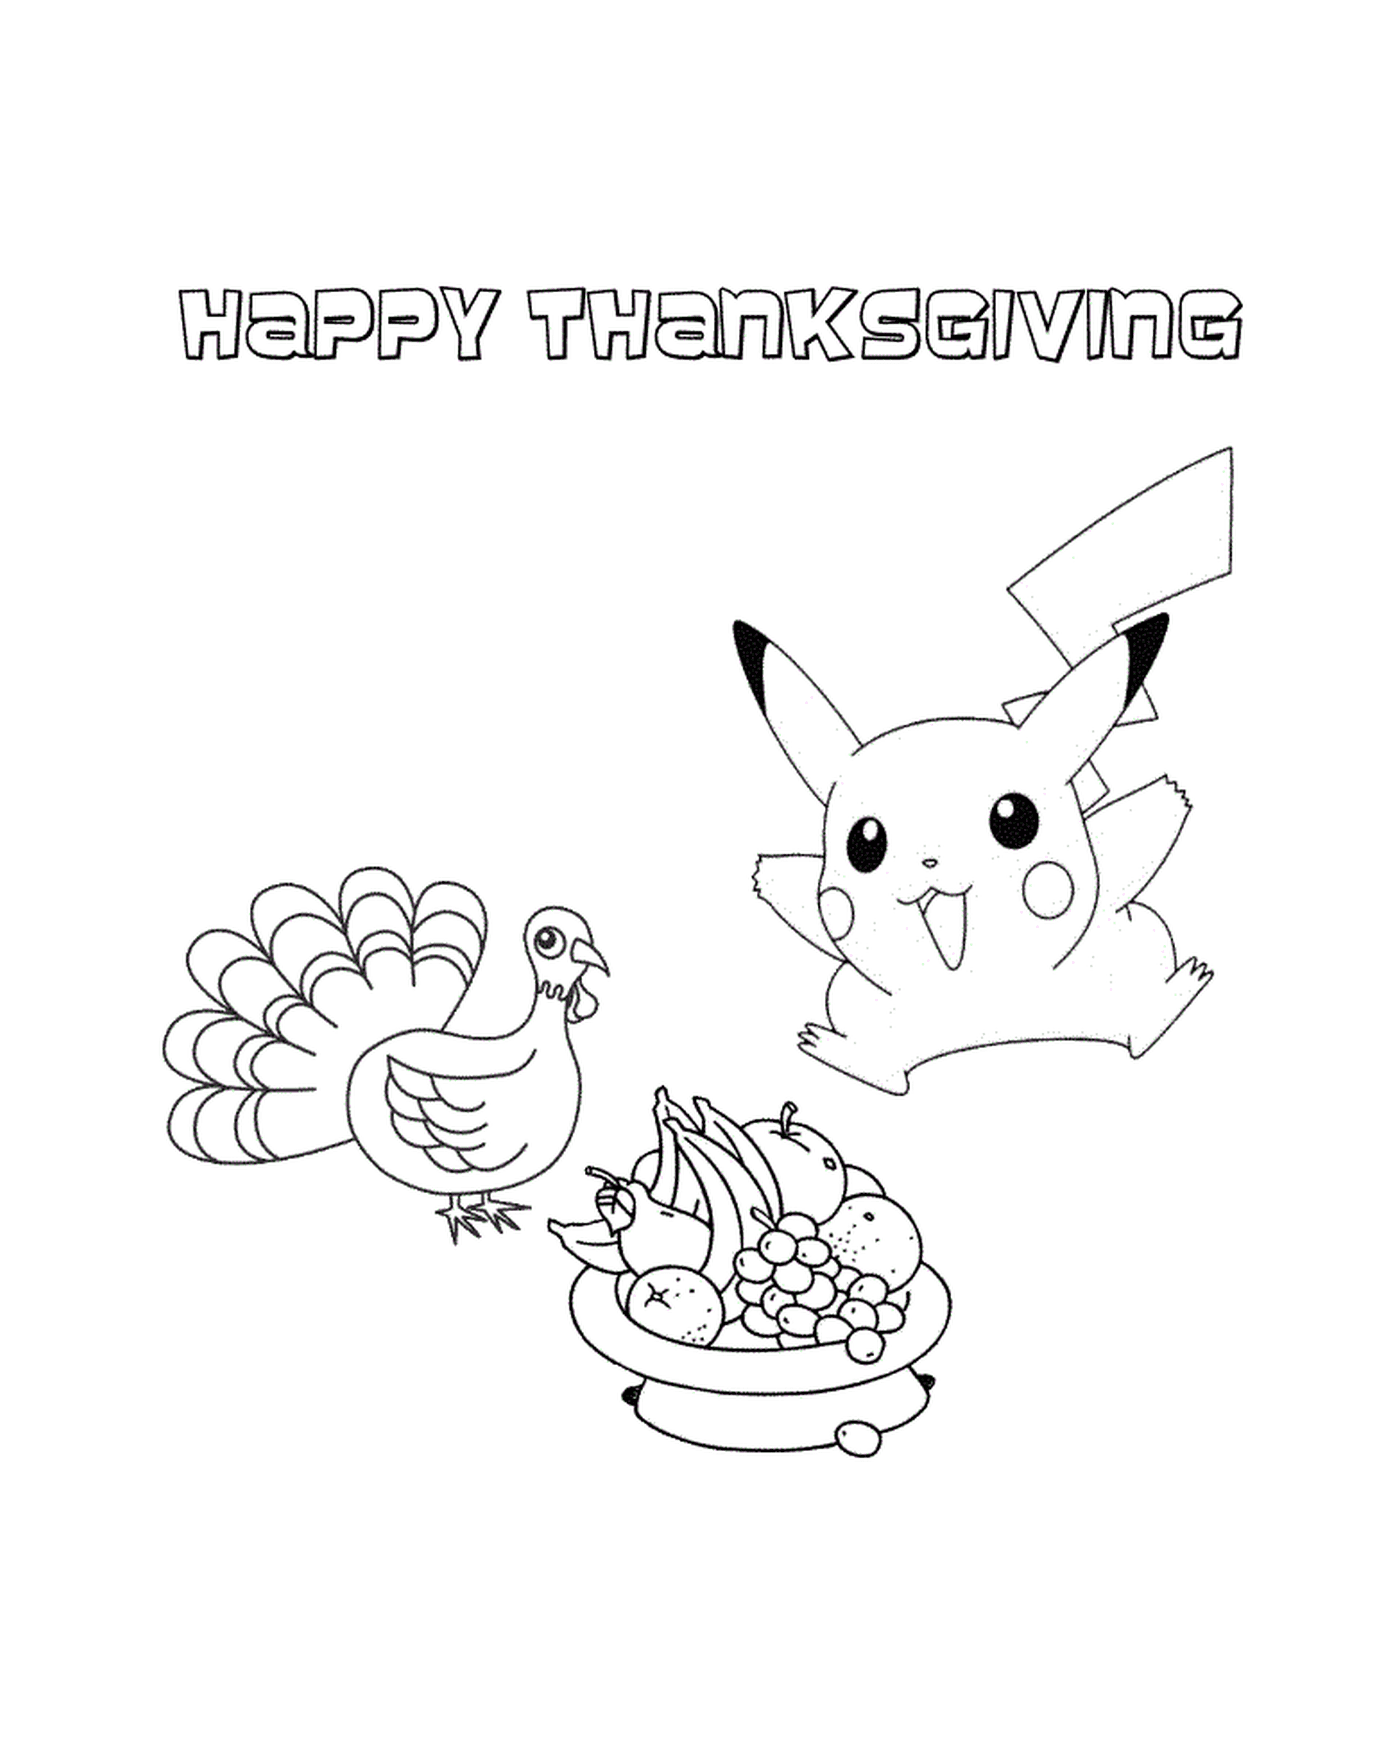  Pikachu with turkey for Thanksgiving 